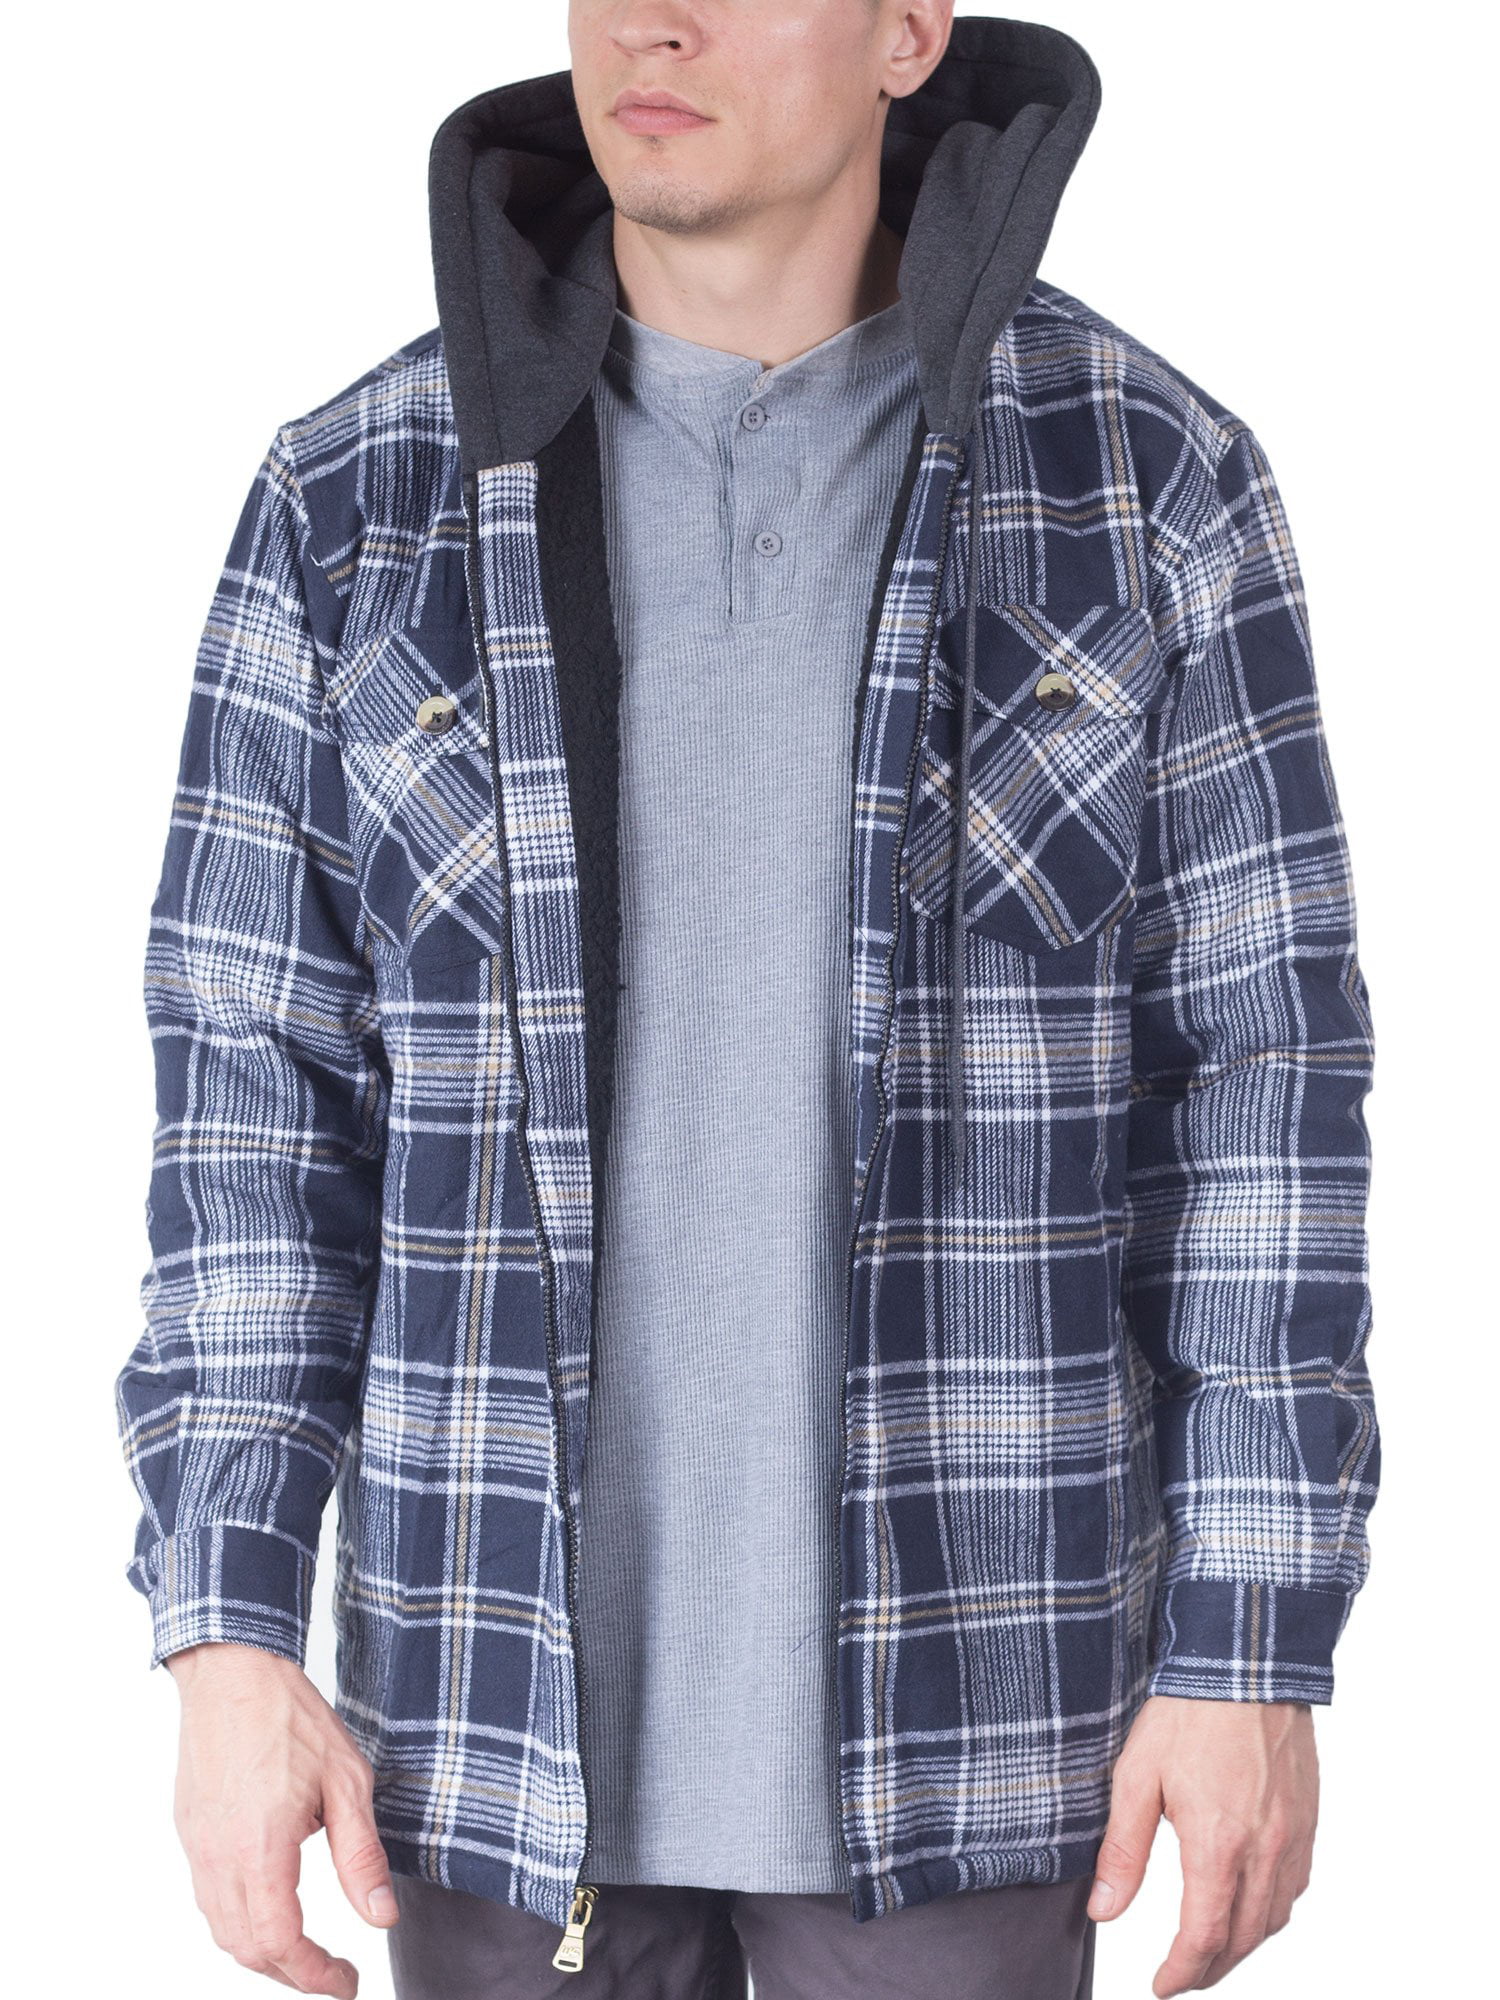 Visive Flannel Jackets for Men Shirt Hooded Zip Up Sherpa Quilted Hoodie 5XL Black Grey 